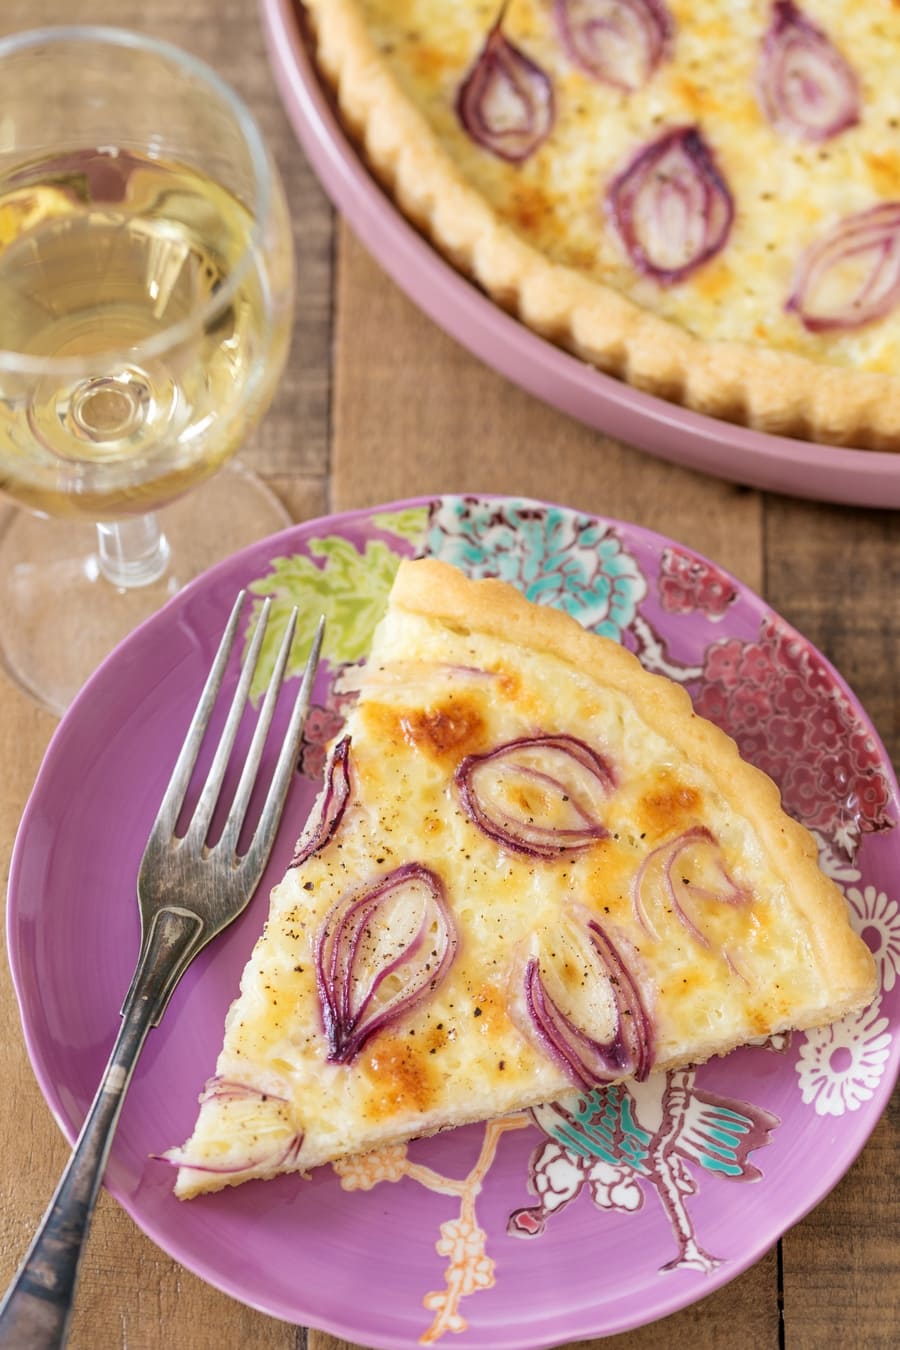 Slice of pearl onion cottage cheese tart.